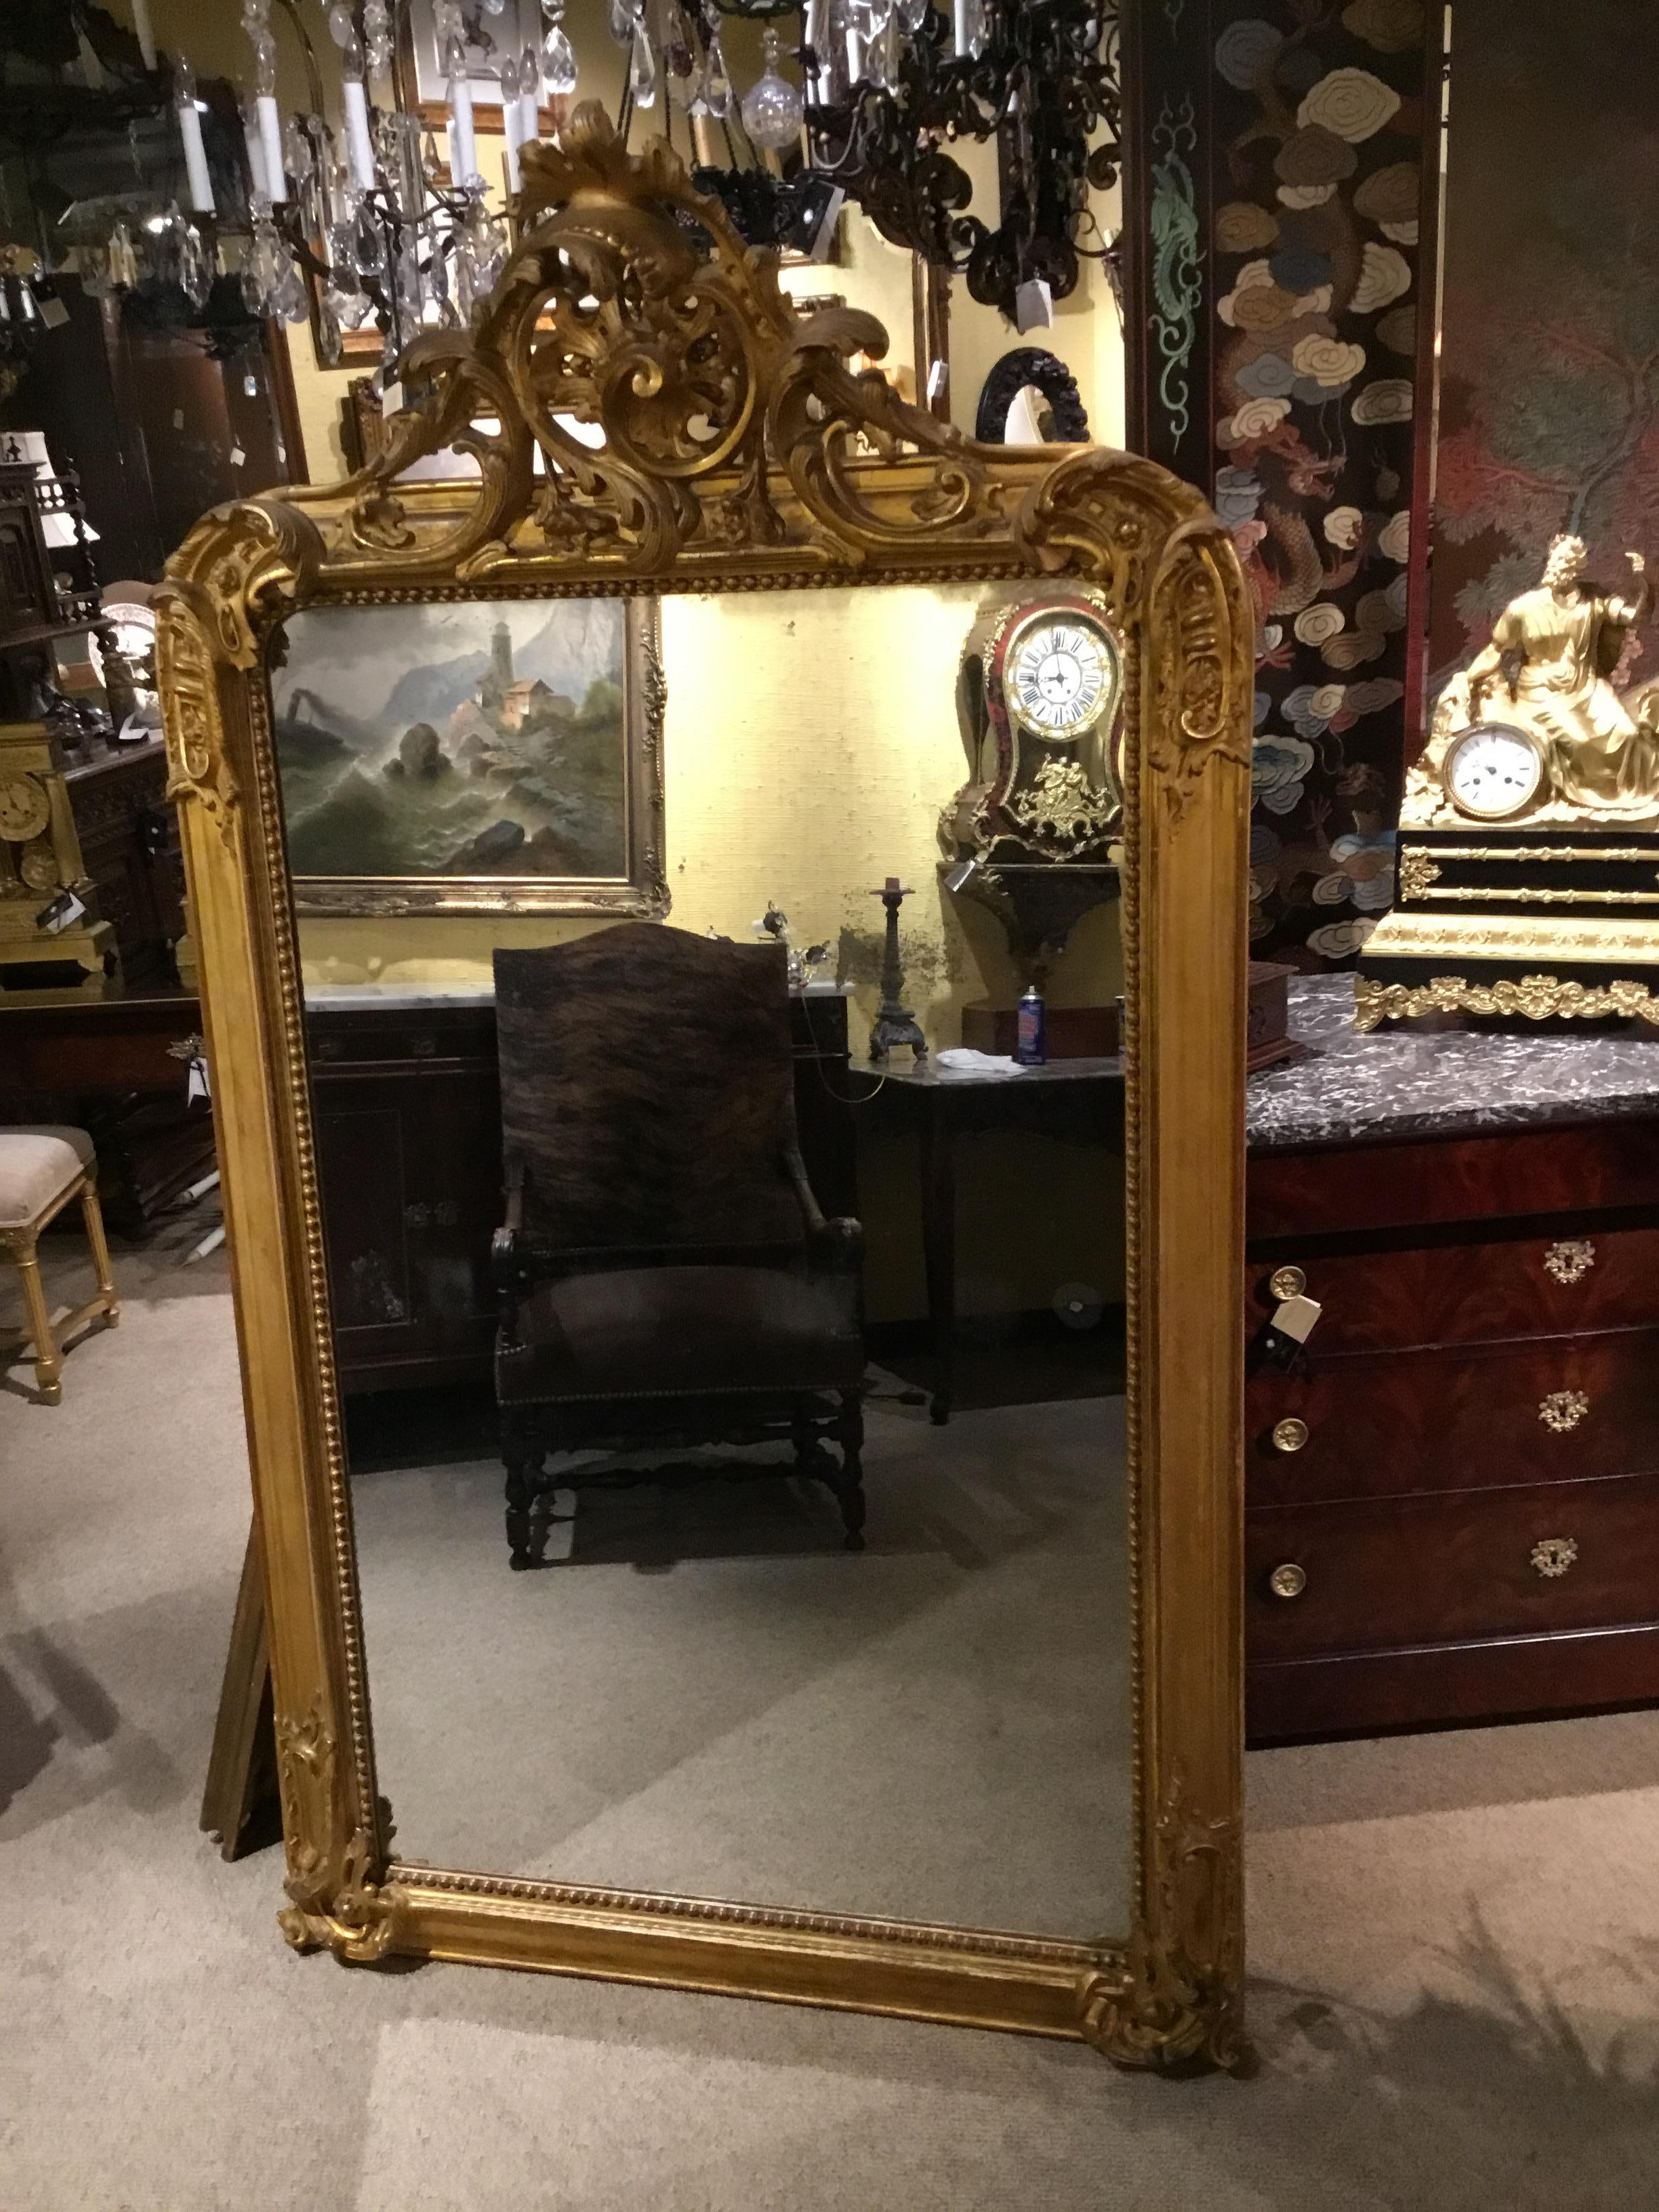 19th Century Louis XV-Style Giltwood Mirror with Large Gilt Cartouche at the Center Crest